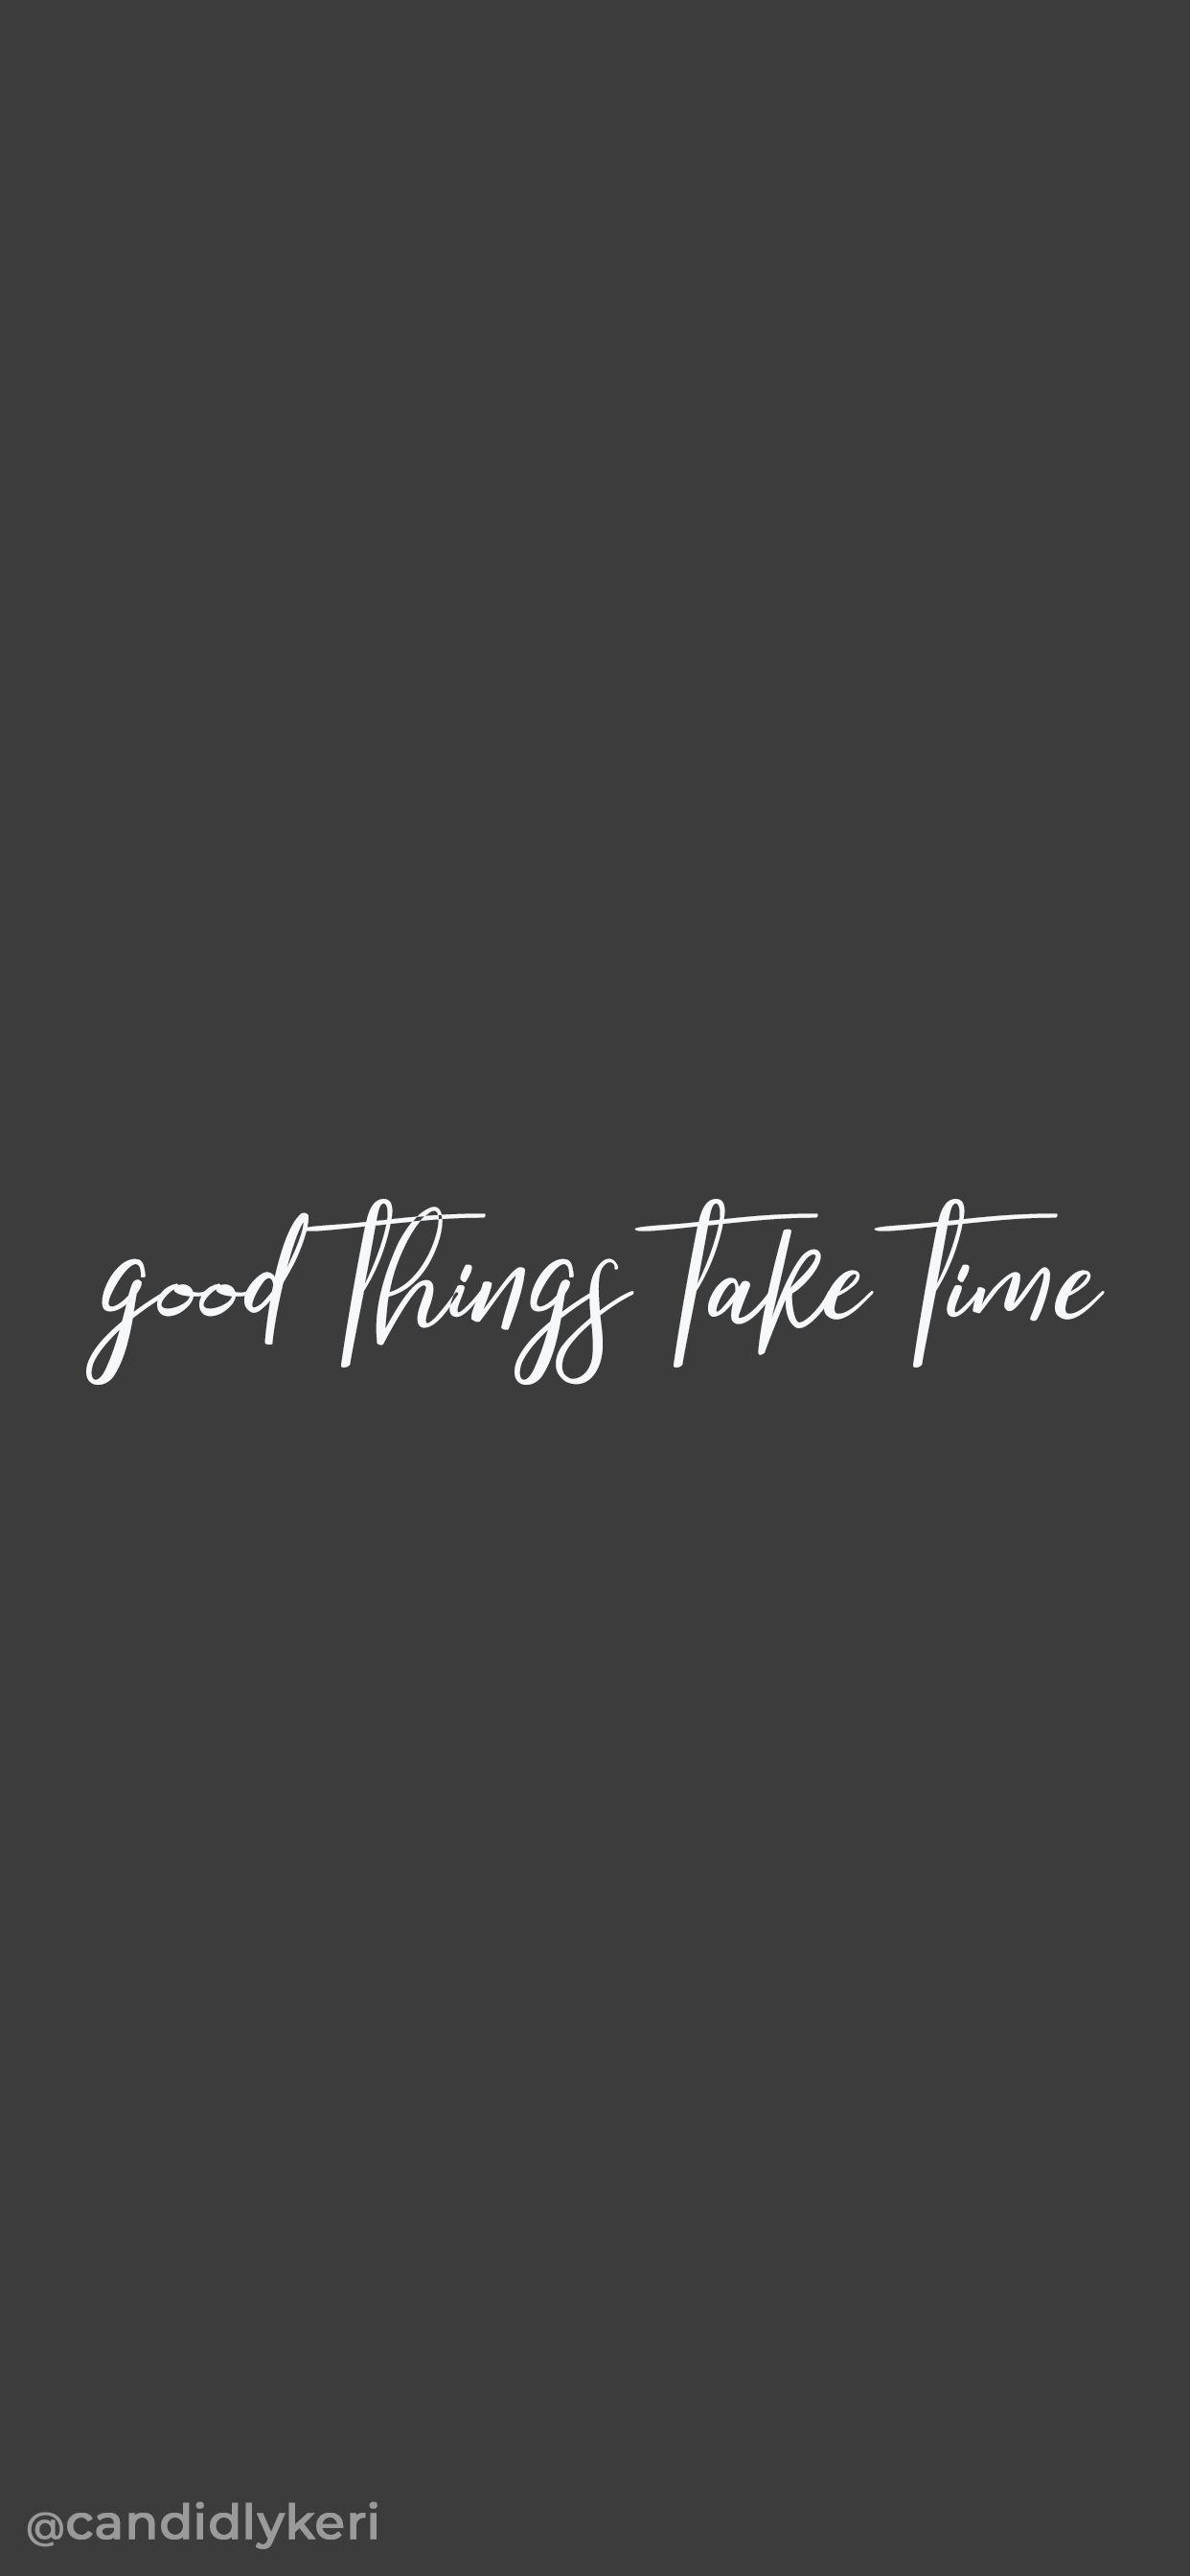 Good Things Take Time Wallpaper ~ Motivational Wallpapers She Believed